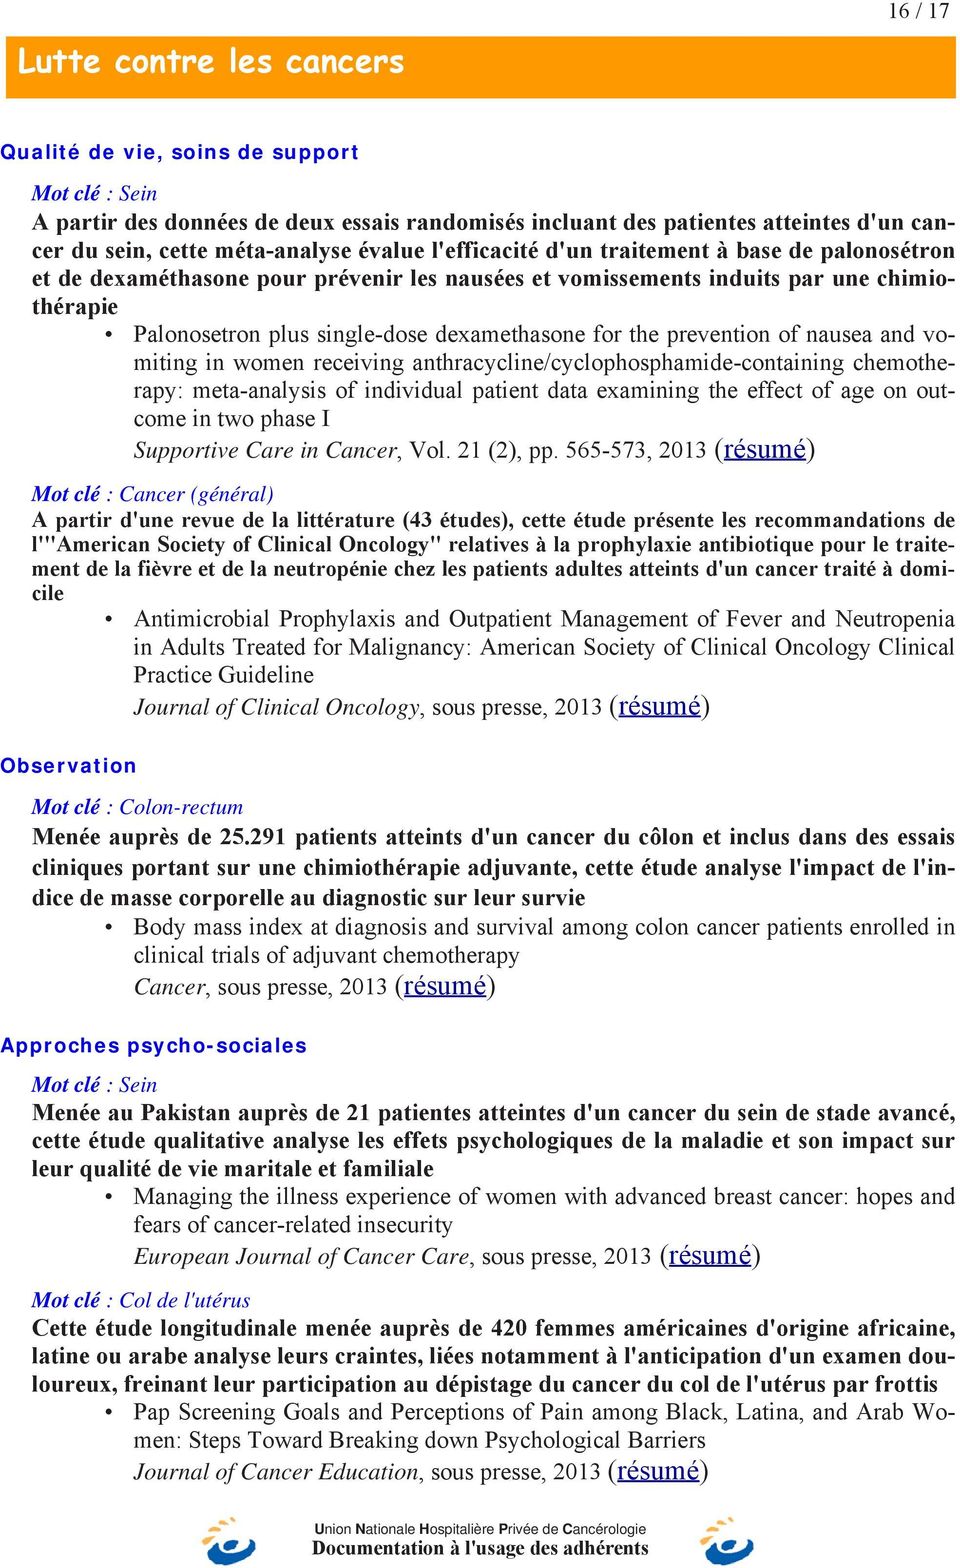 dexamethasone for the prevention of nausea and vomiting in women receiving anthracycline/cyclophosphamide-containing chemotherapy: meta-analysis of individual patient data examining the effect of age